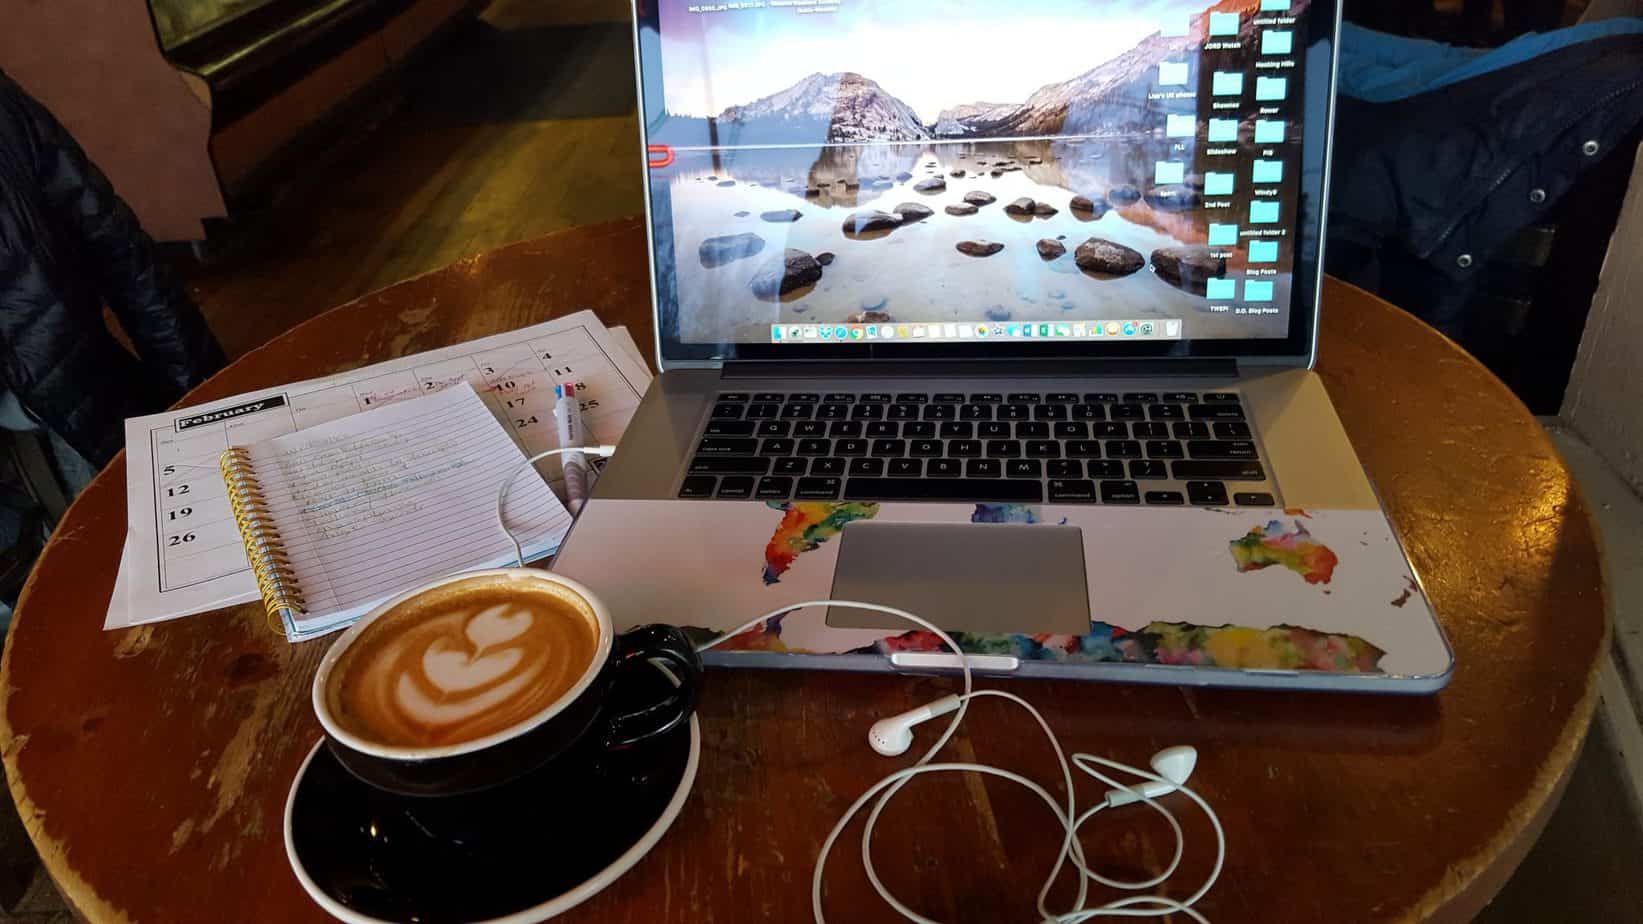 A cup of coffee sits next to a journal and a laptop.